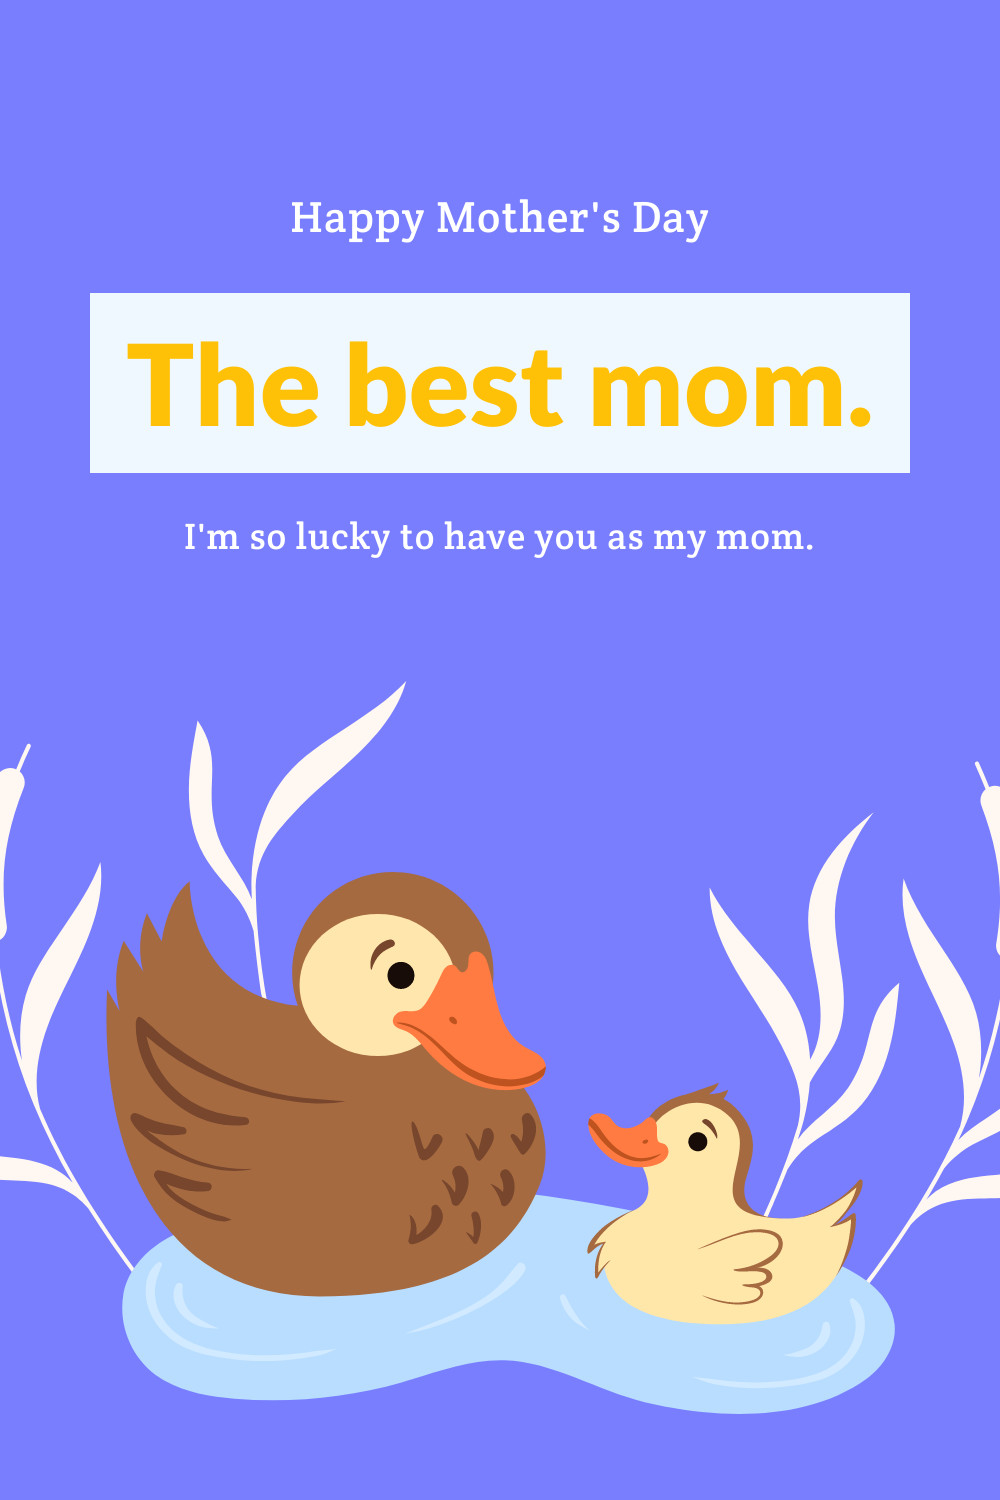 Mother's Day The Best Mom Facebook Cover 820x360